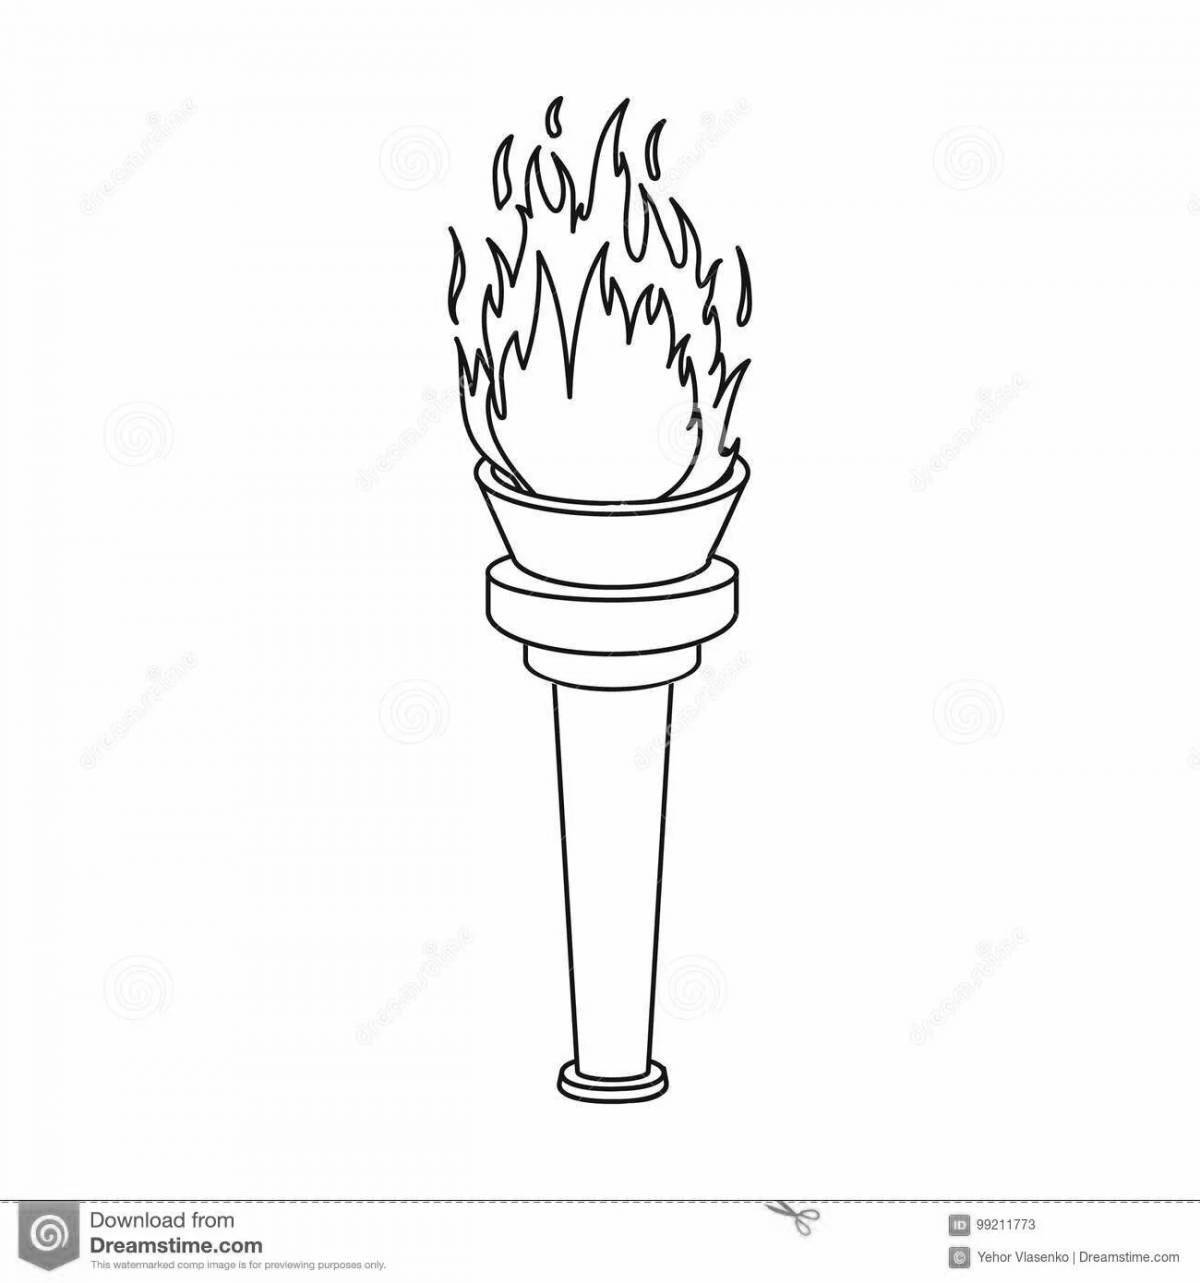 Playful torch coloring page for kids